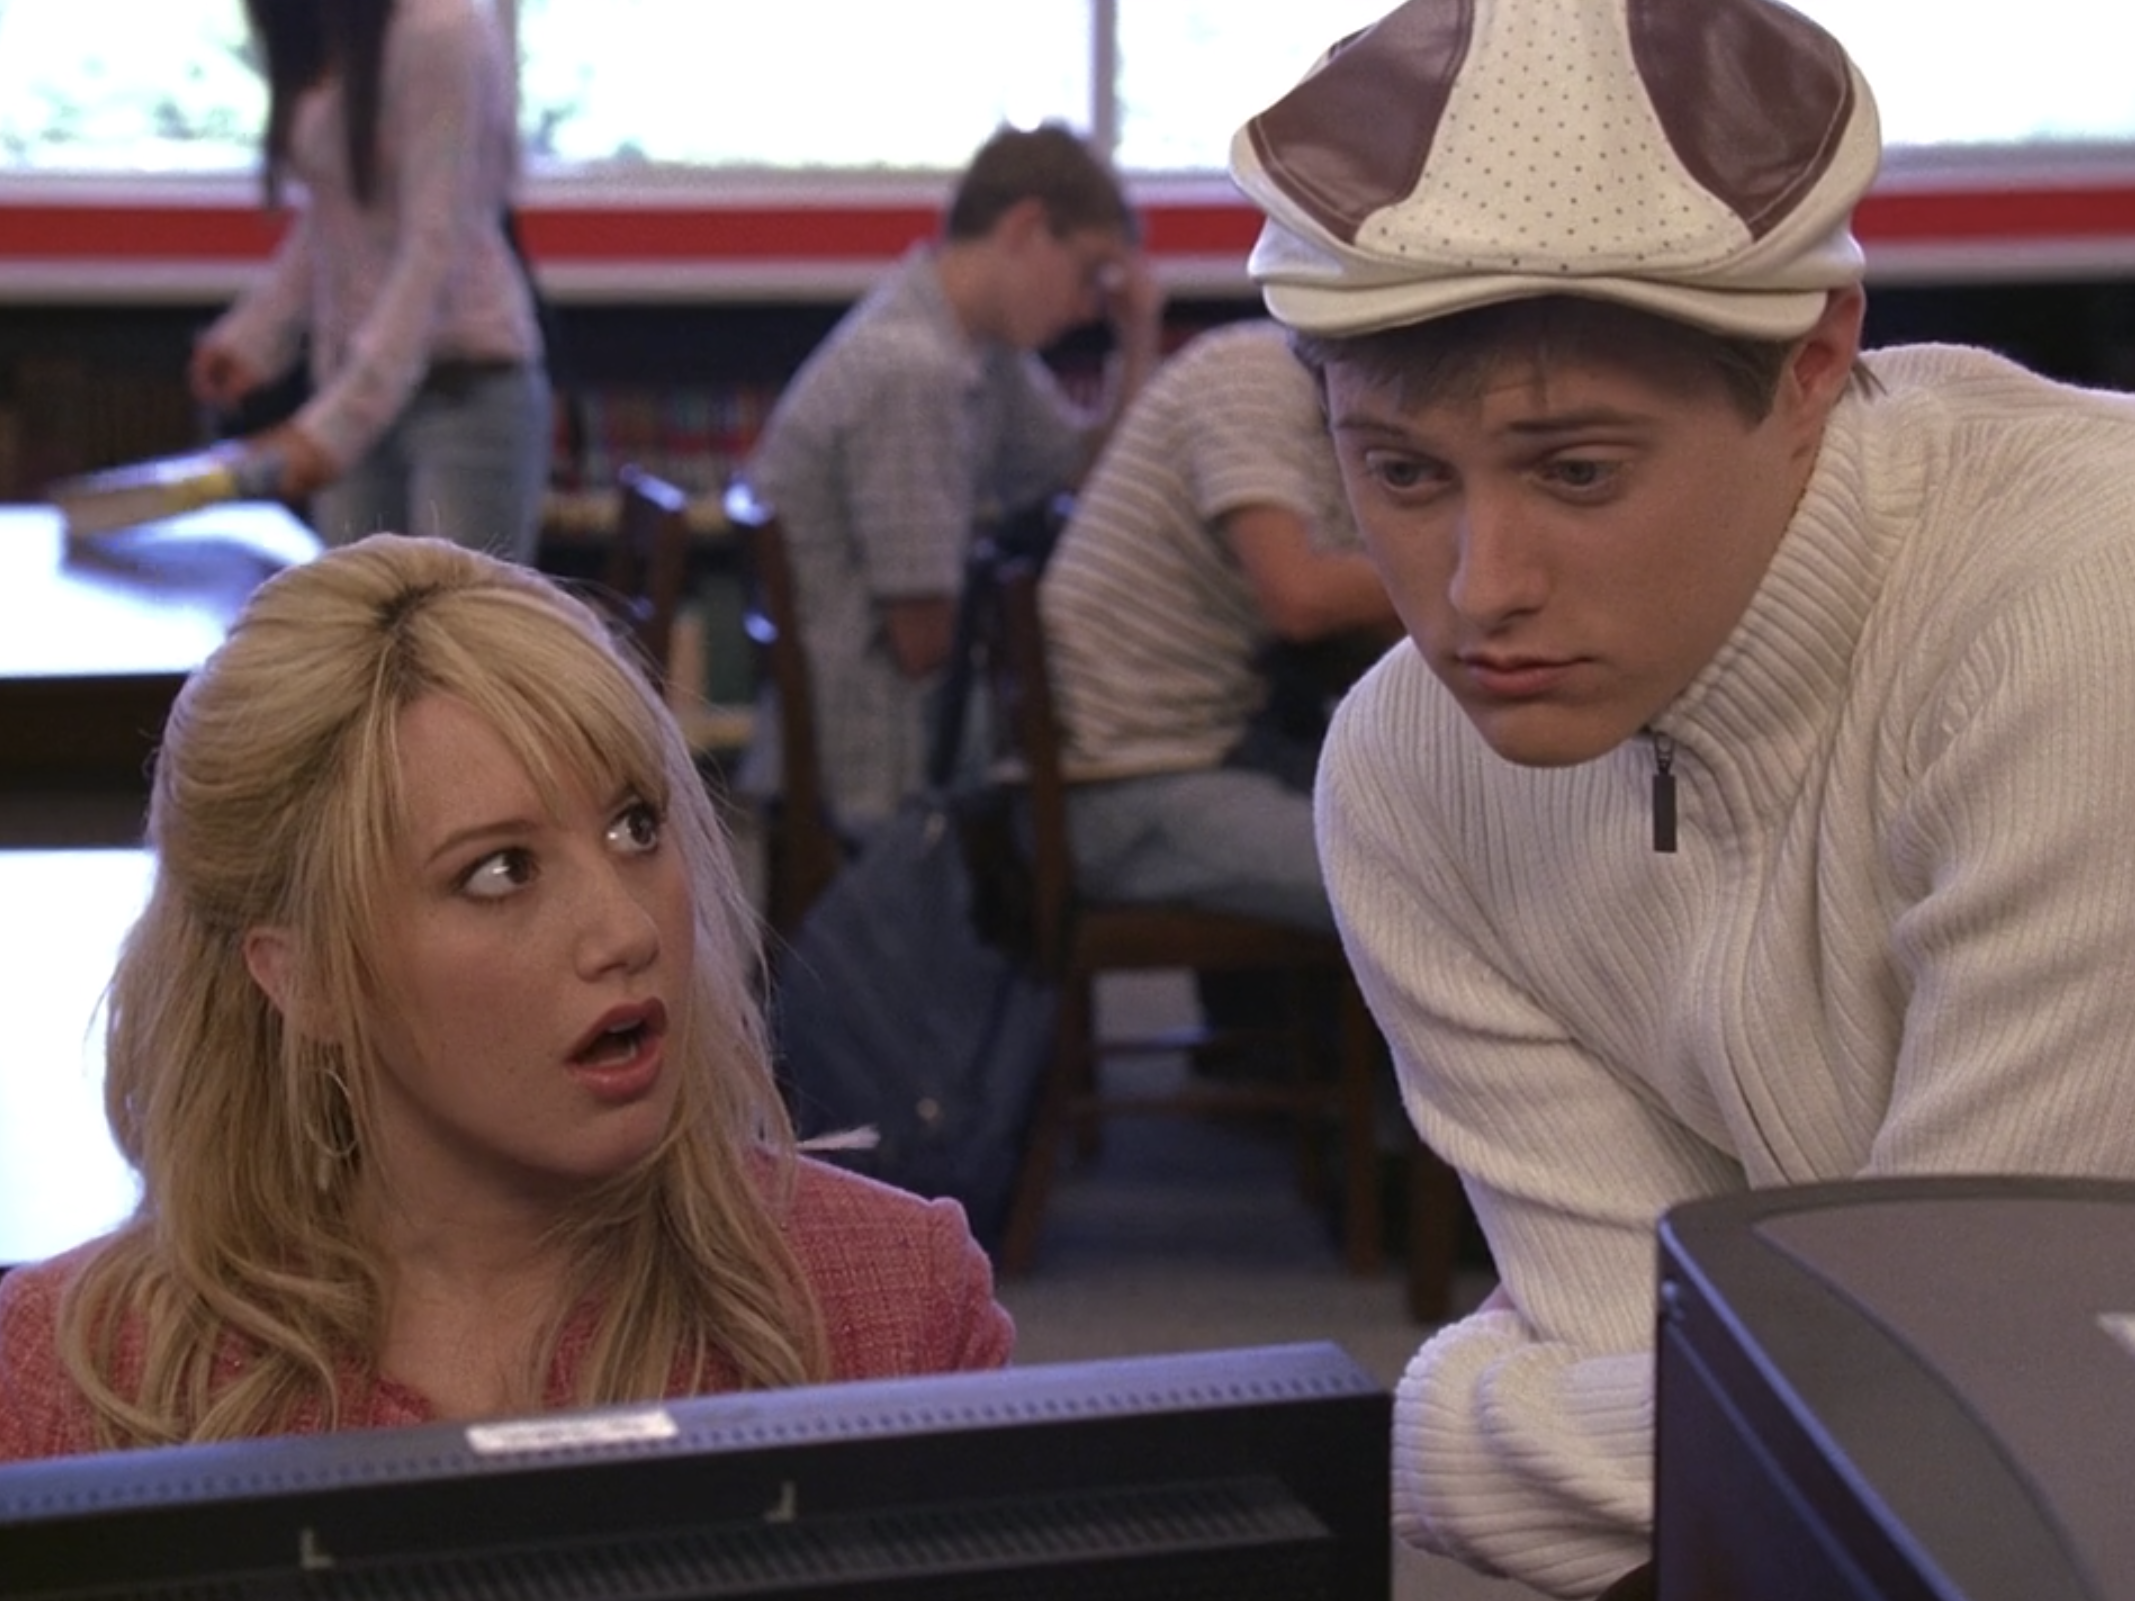 Lucas Grabeel as Ryan Evans and Ashley Tisdale as Sharpay Evans in "High School Musical." 3 Credit Disney Channel